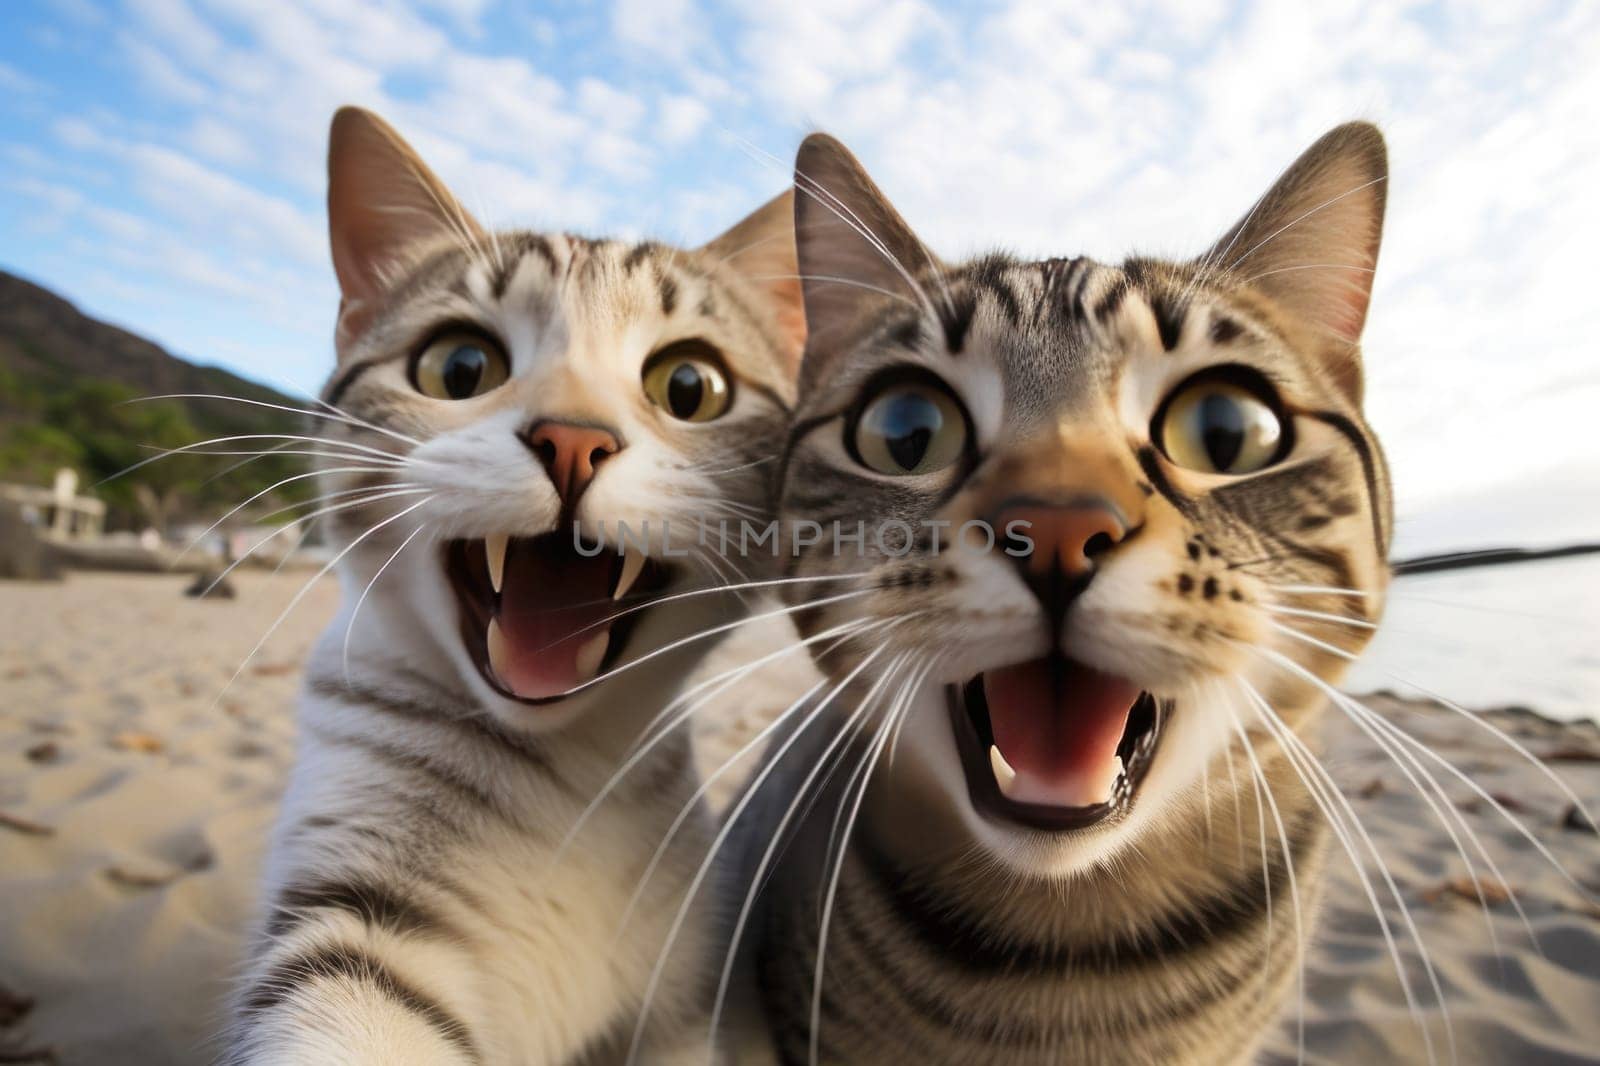 Two funny cats take a selfie on the beach. Humor.